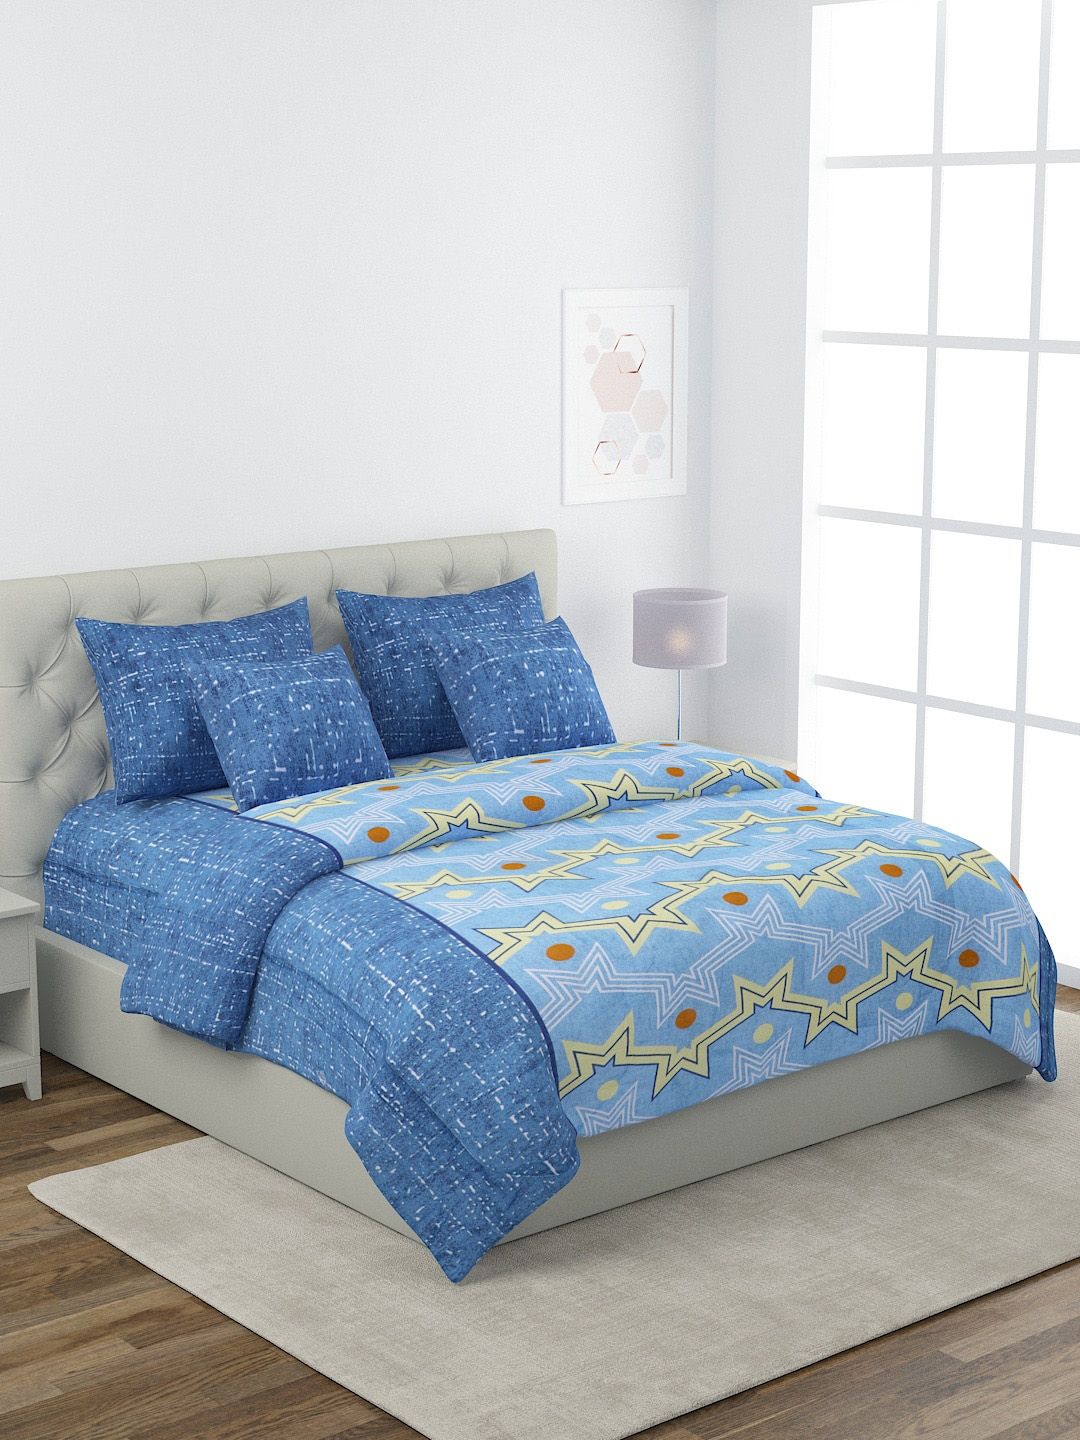 ROMEE Blue & Light Yellow Quirky Printed Double King Bedding Set with AC Comforter Price in India